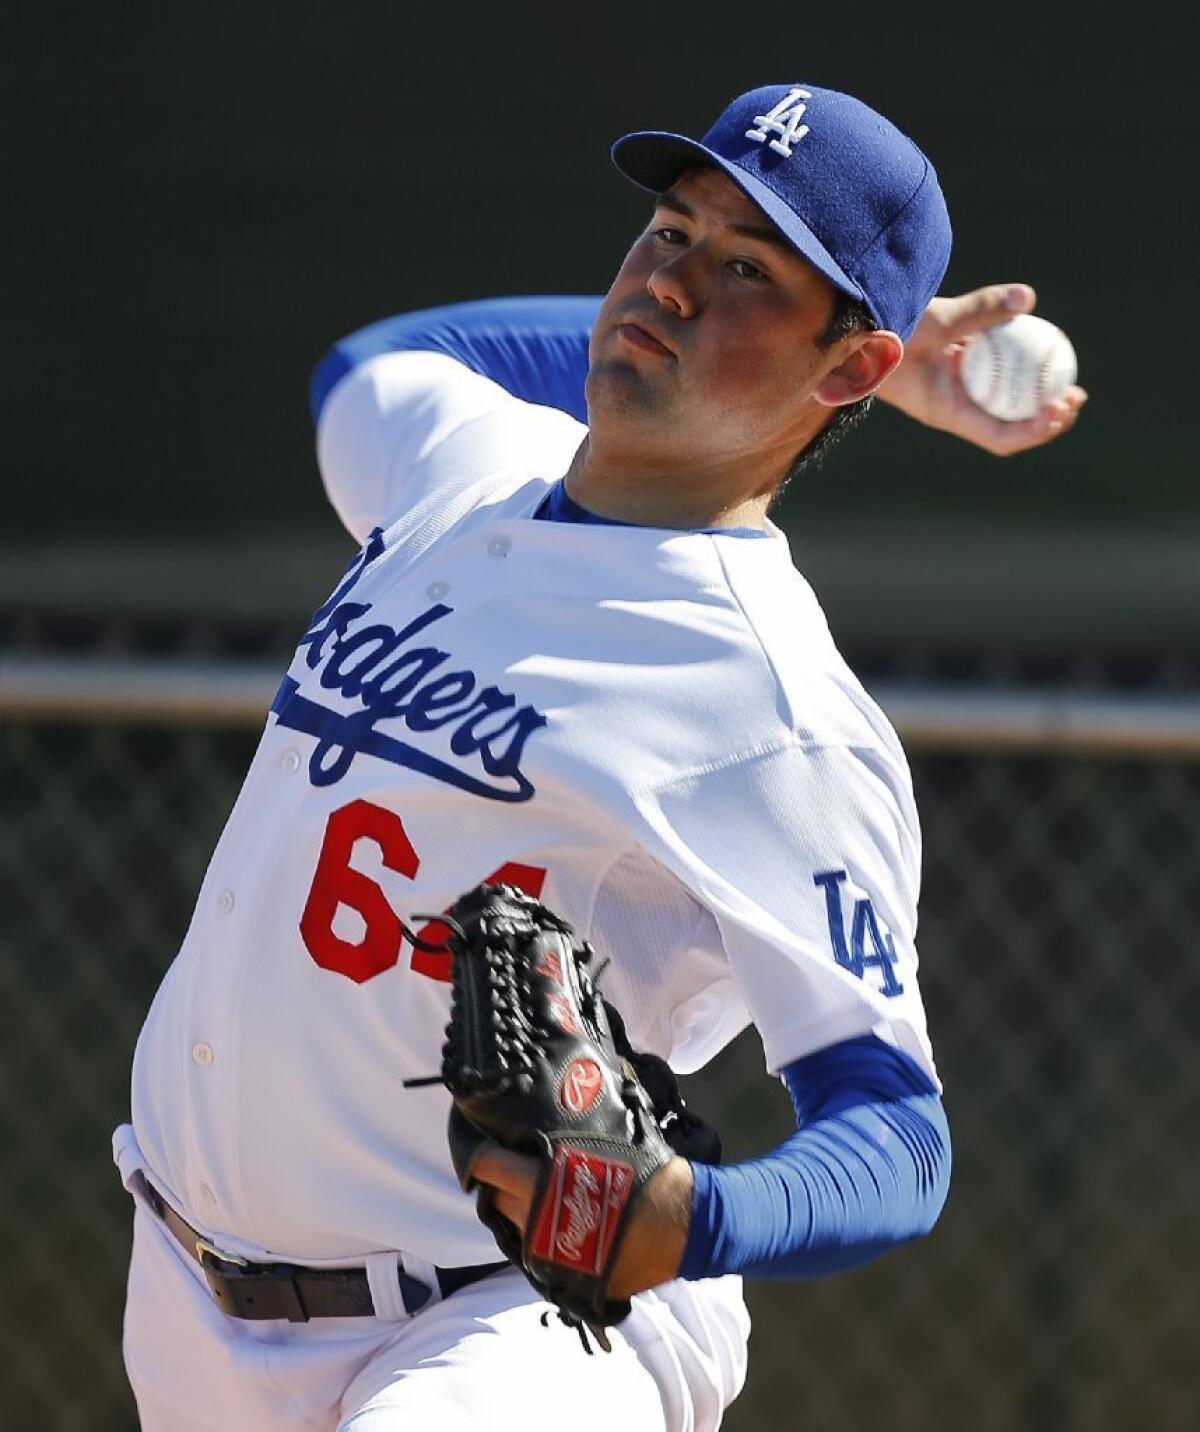 Dodgers pitcher Zach Lee throws during spring training on Feb. 20 in Glendale, Ariz.